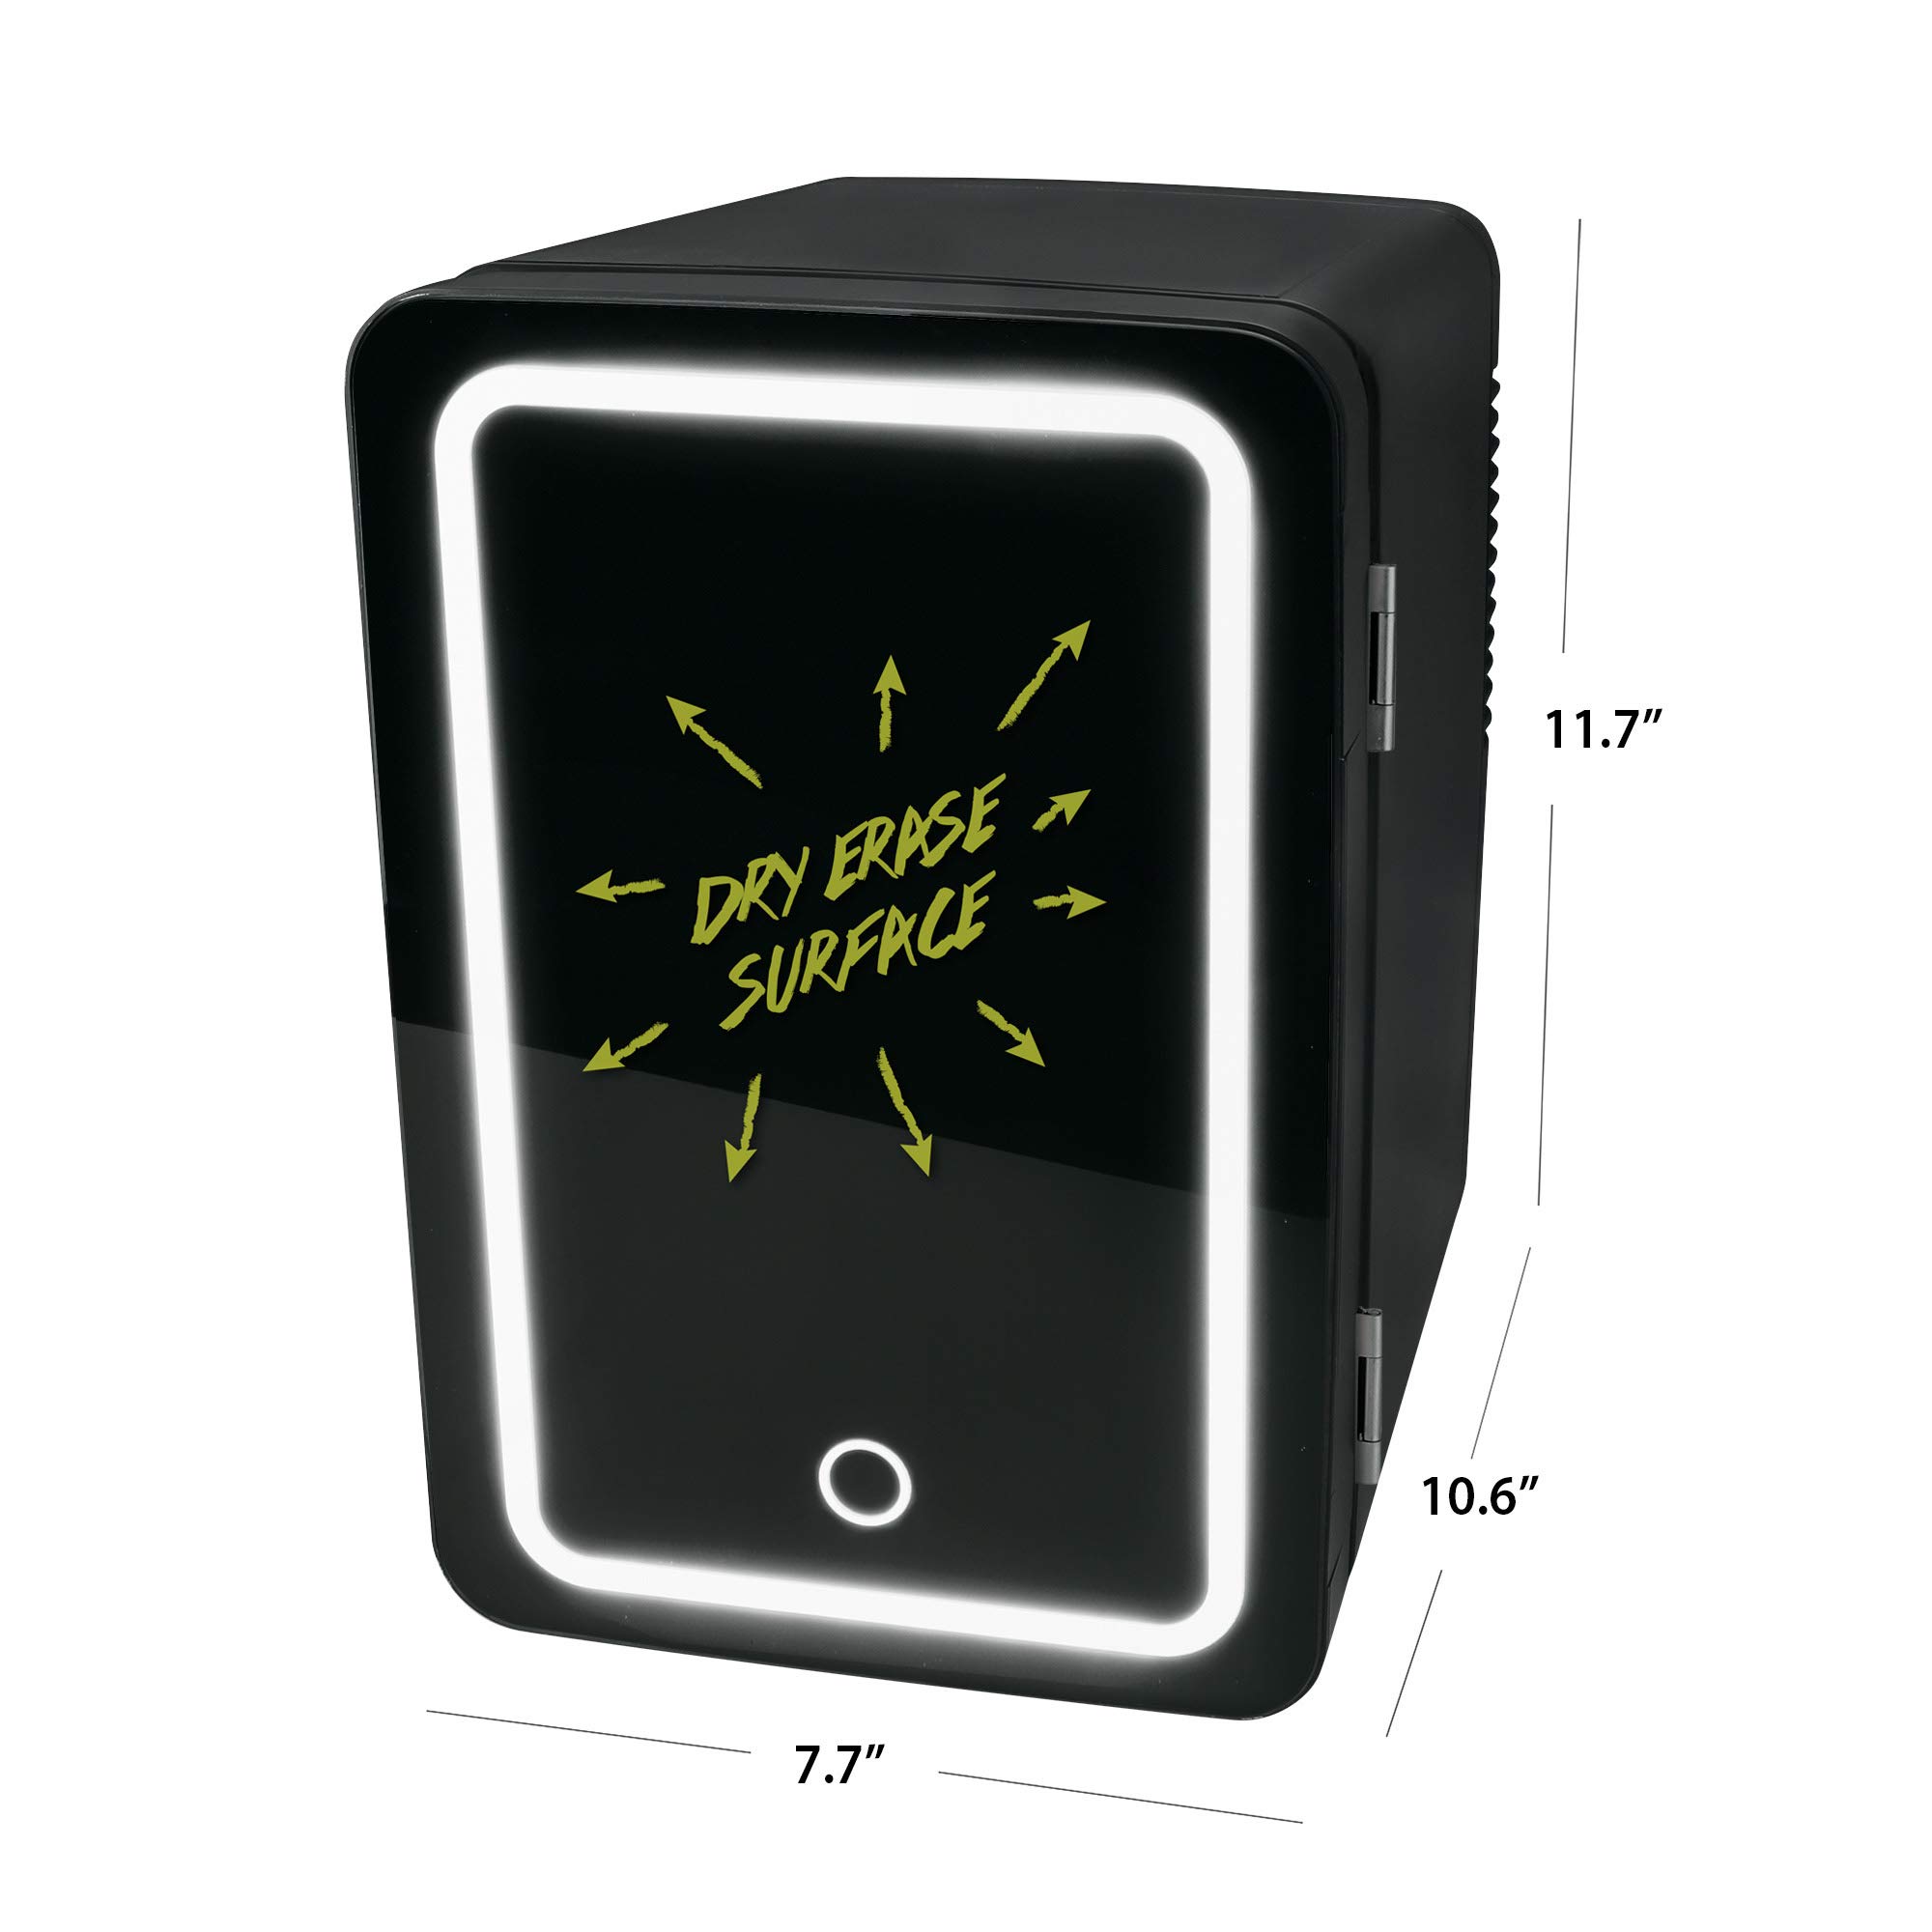 Personal Chiller Led Lighted Mini Fridge Dry erase surface keeps warm or cold for in house or on the go includes two plugs, Black, 6L